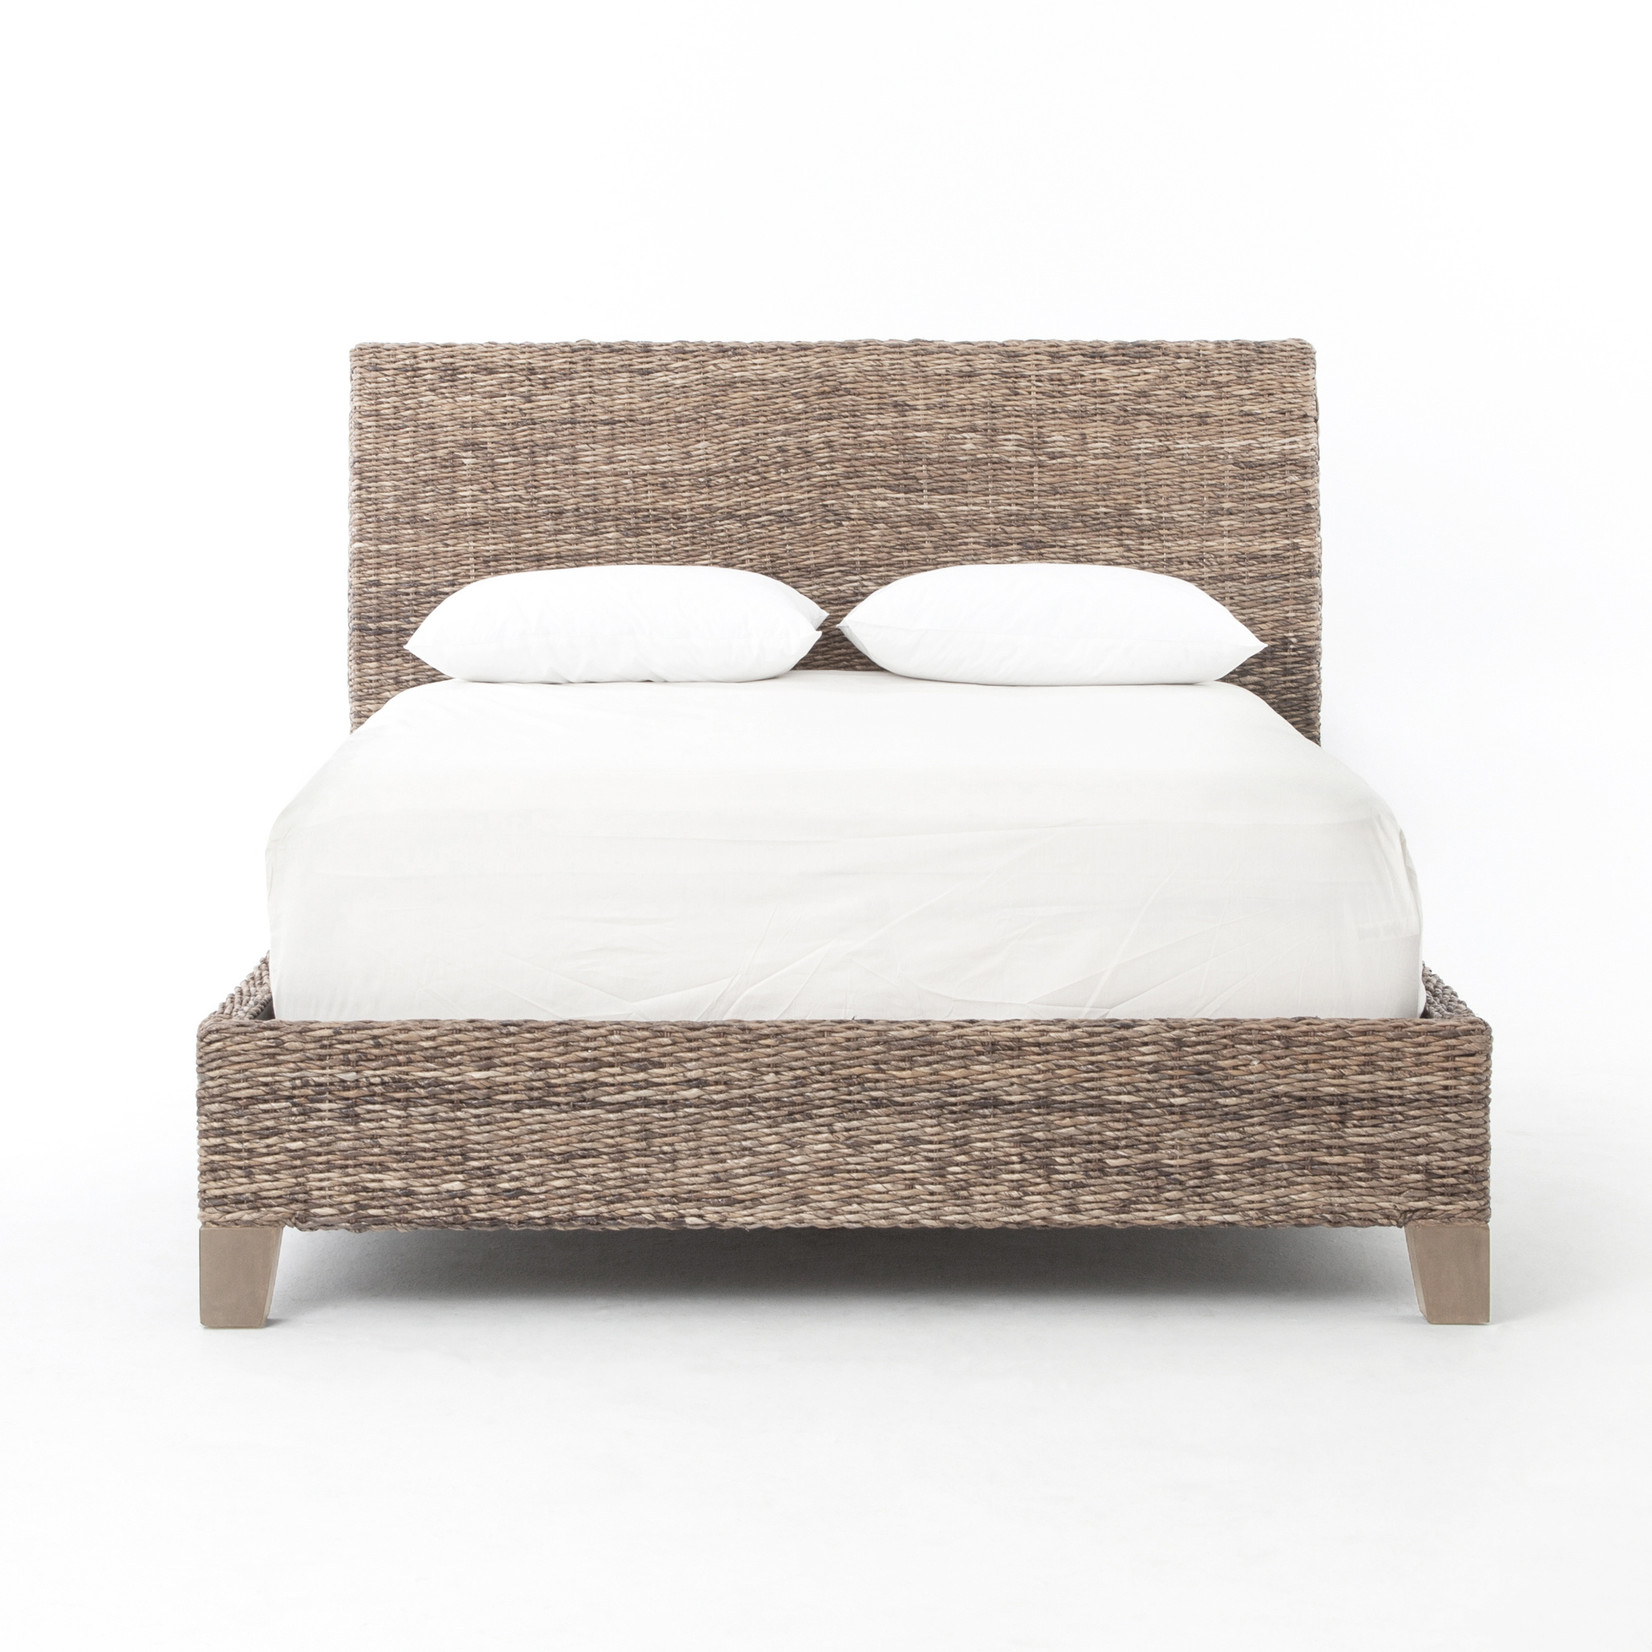 Four Hands Lanai Banana Leaf Queen Bed